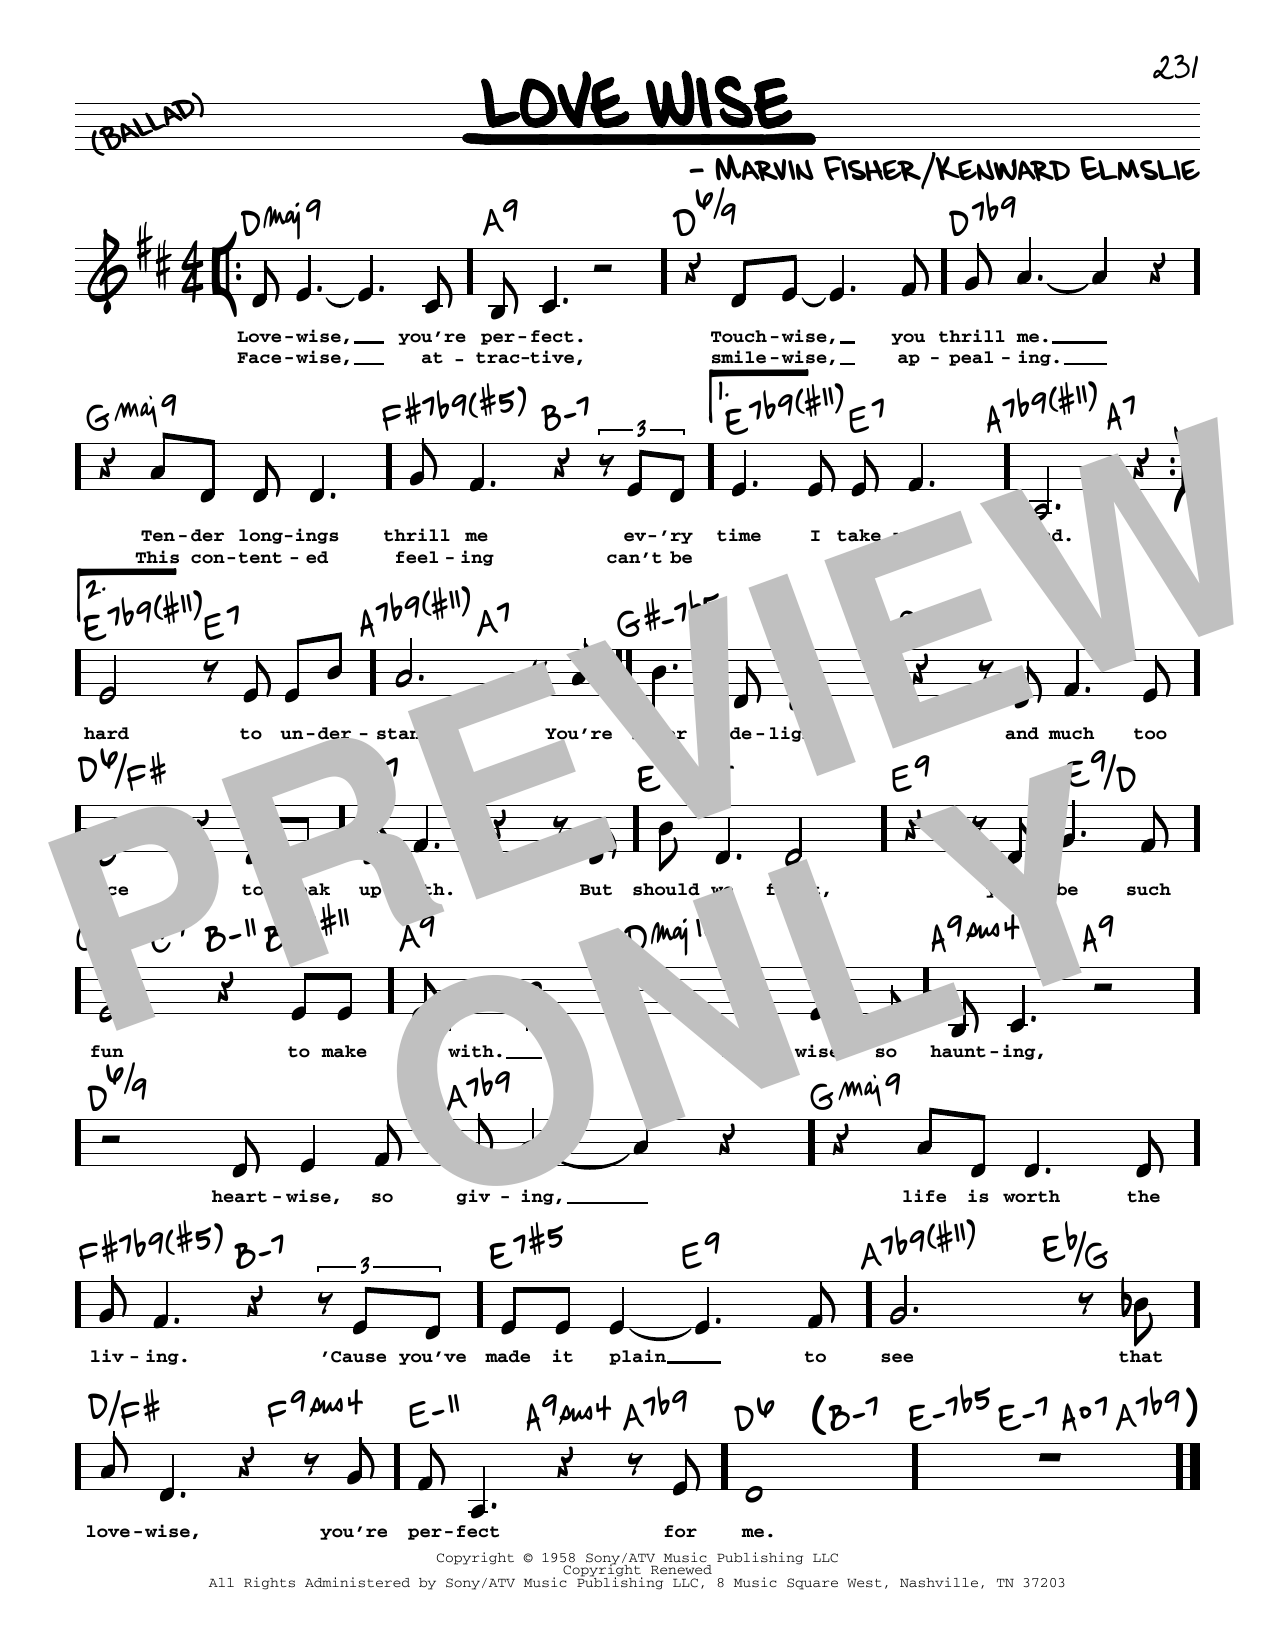 Marvin Fisher Love Wise (Low Voice) sheet music notes printable PDF score